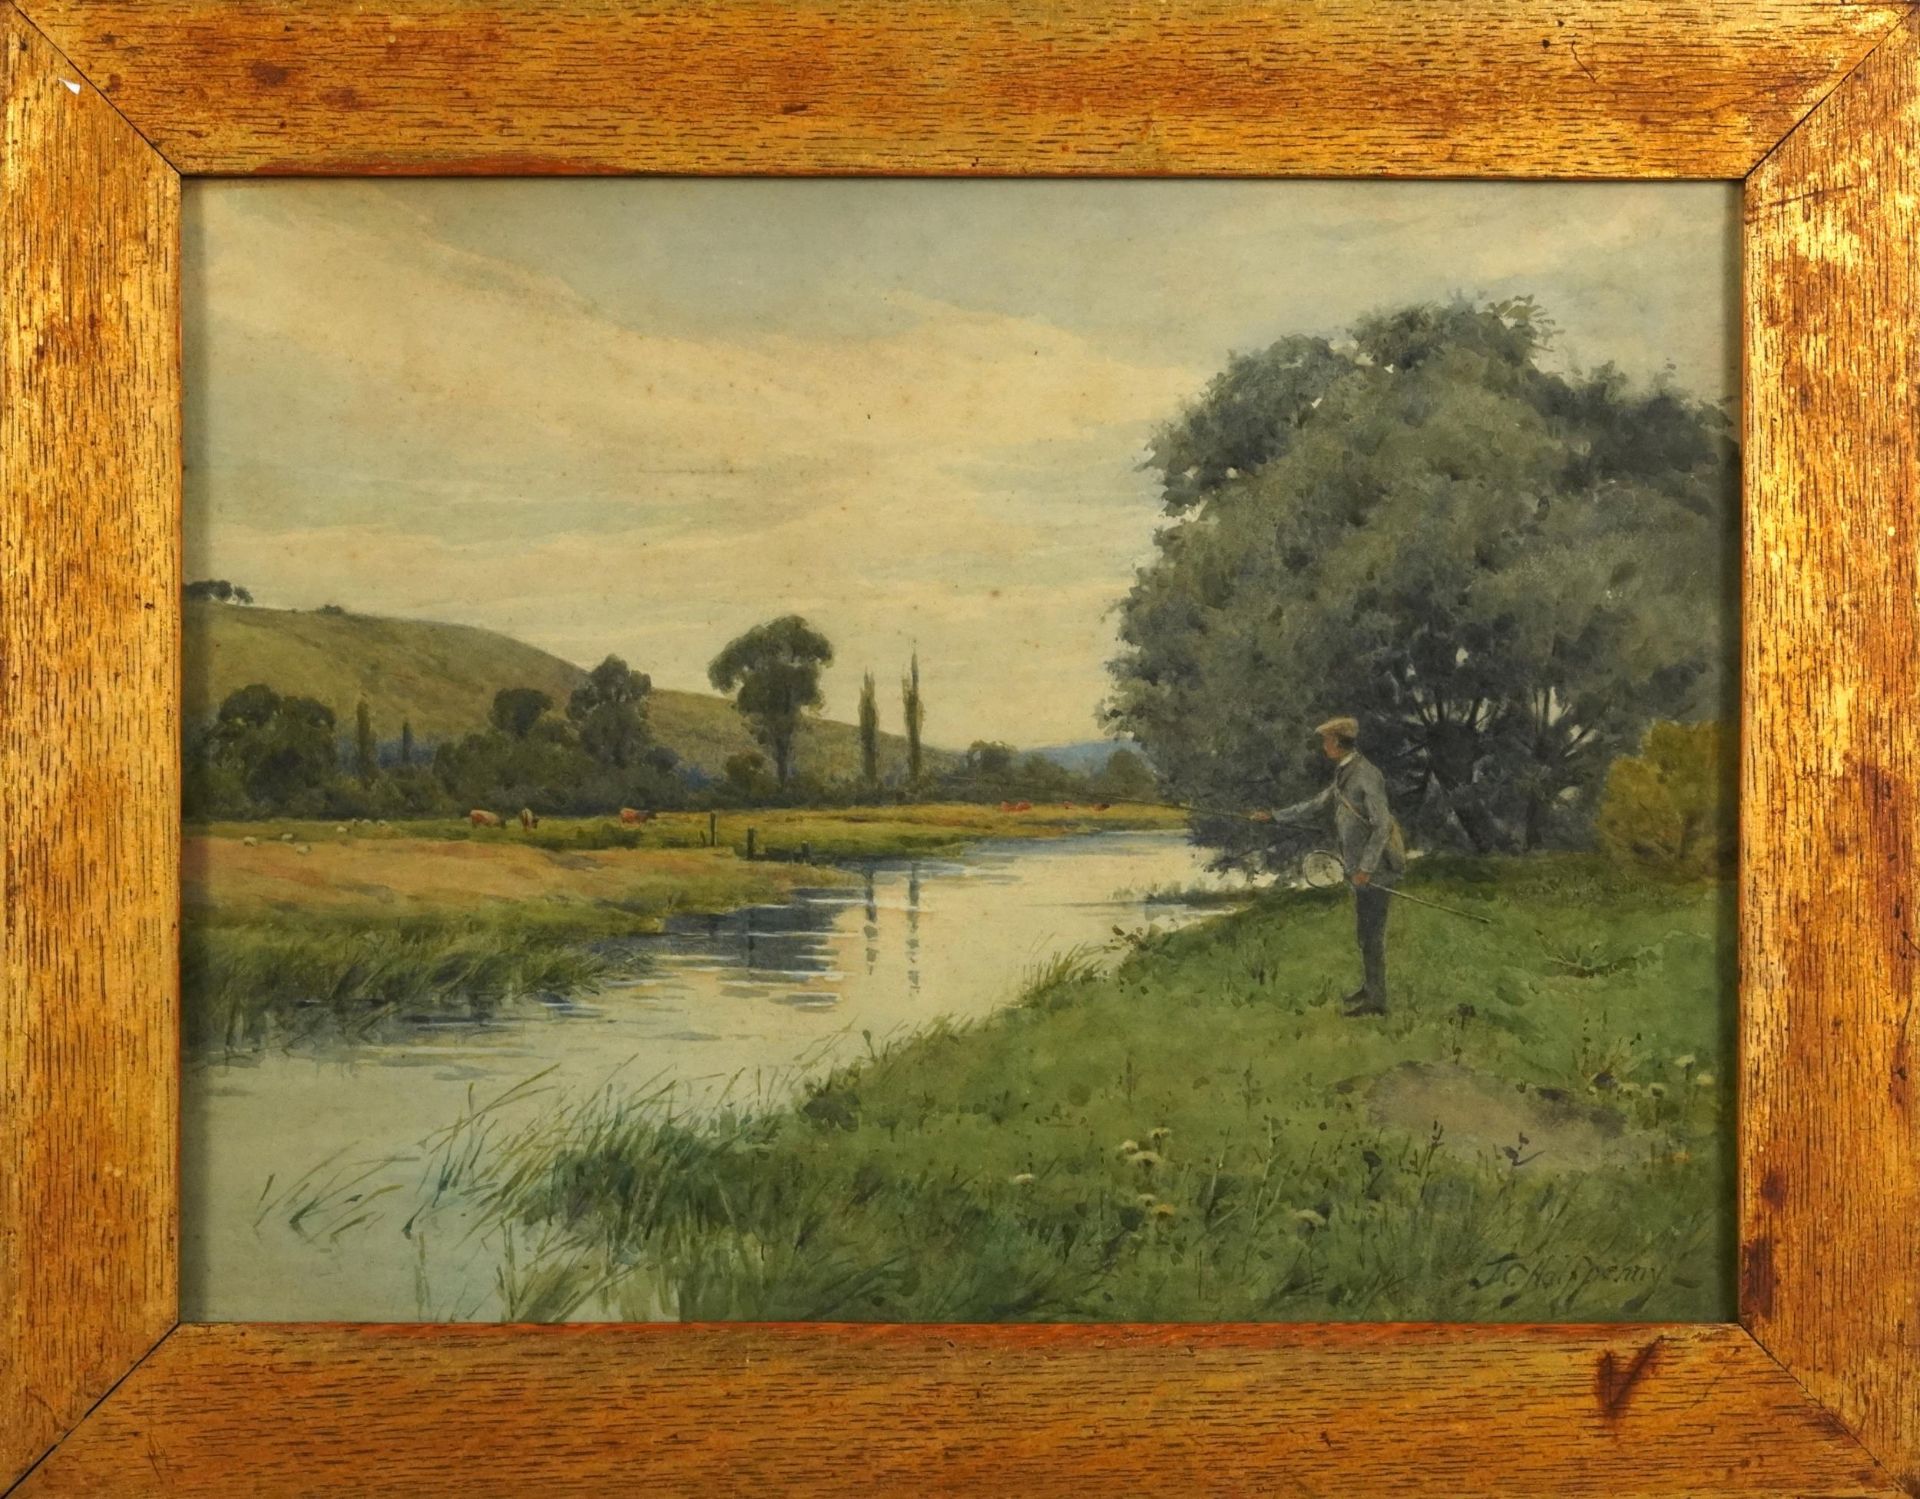 J C Halfpenny - Gentleman fly fishing beside a river, 19th century watercolour, framed and glazed, - Image 2 of 4